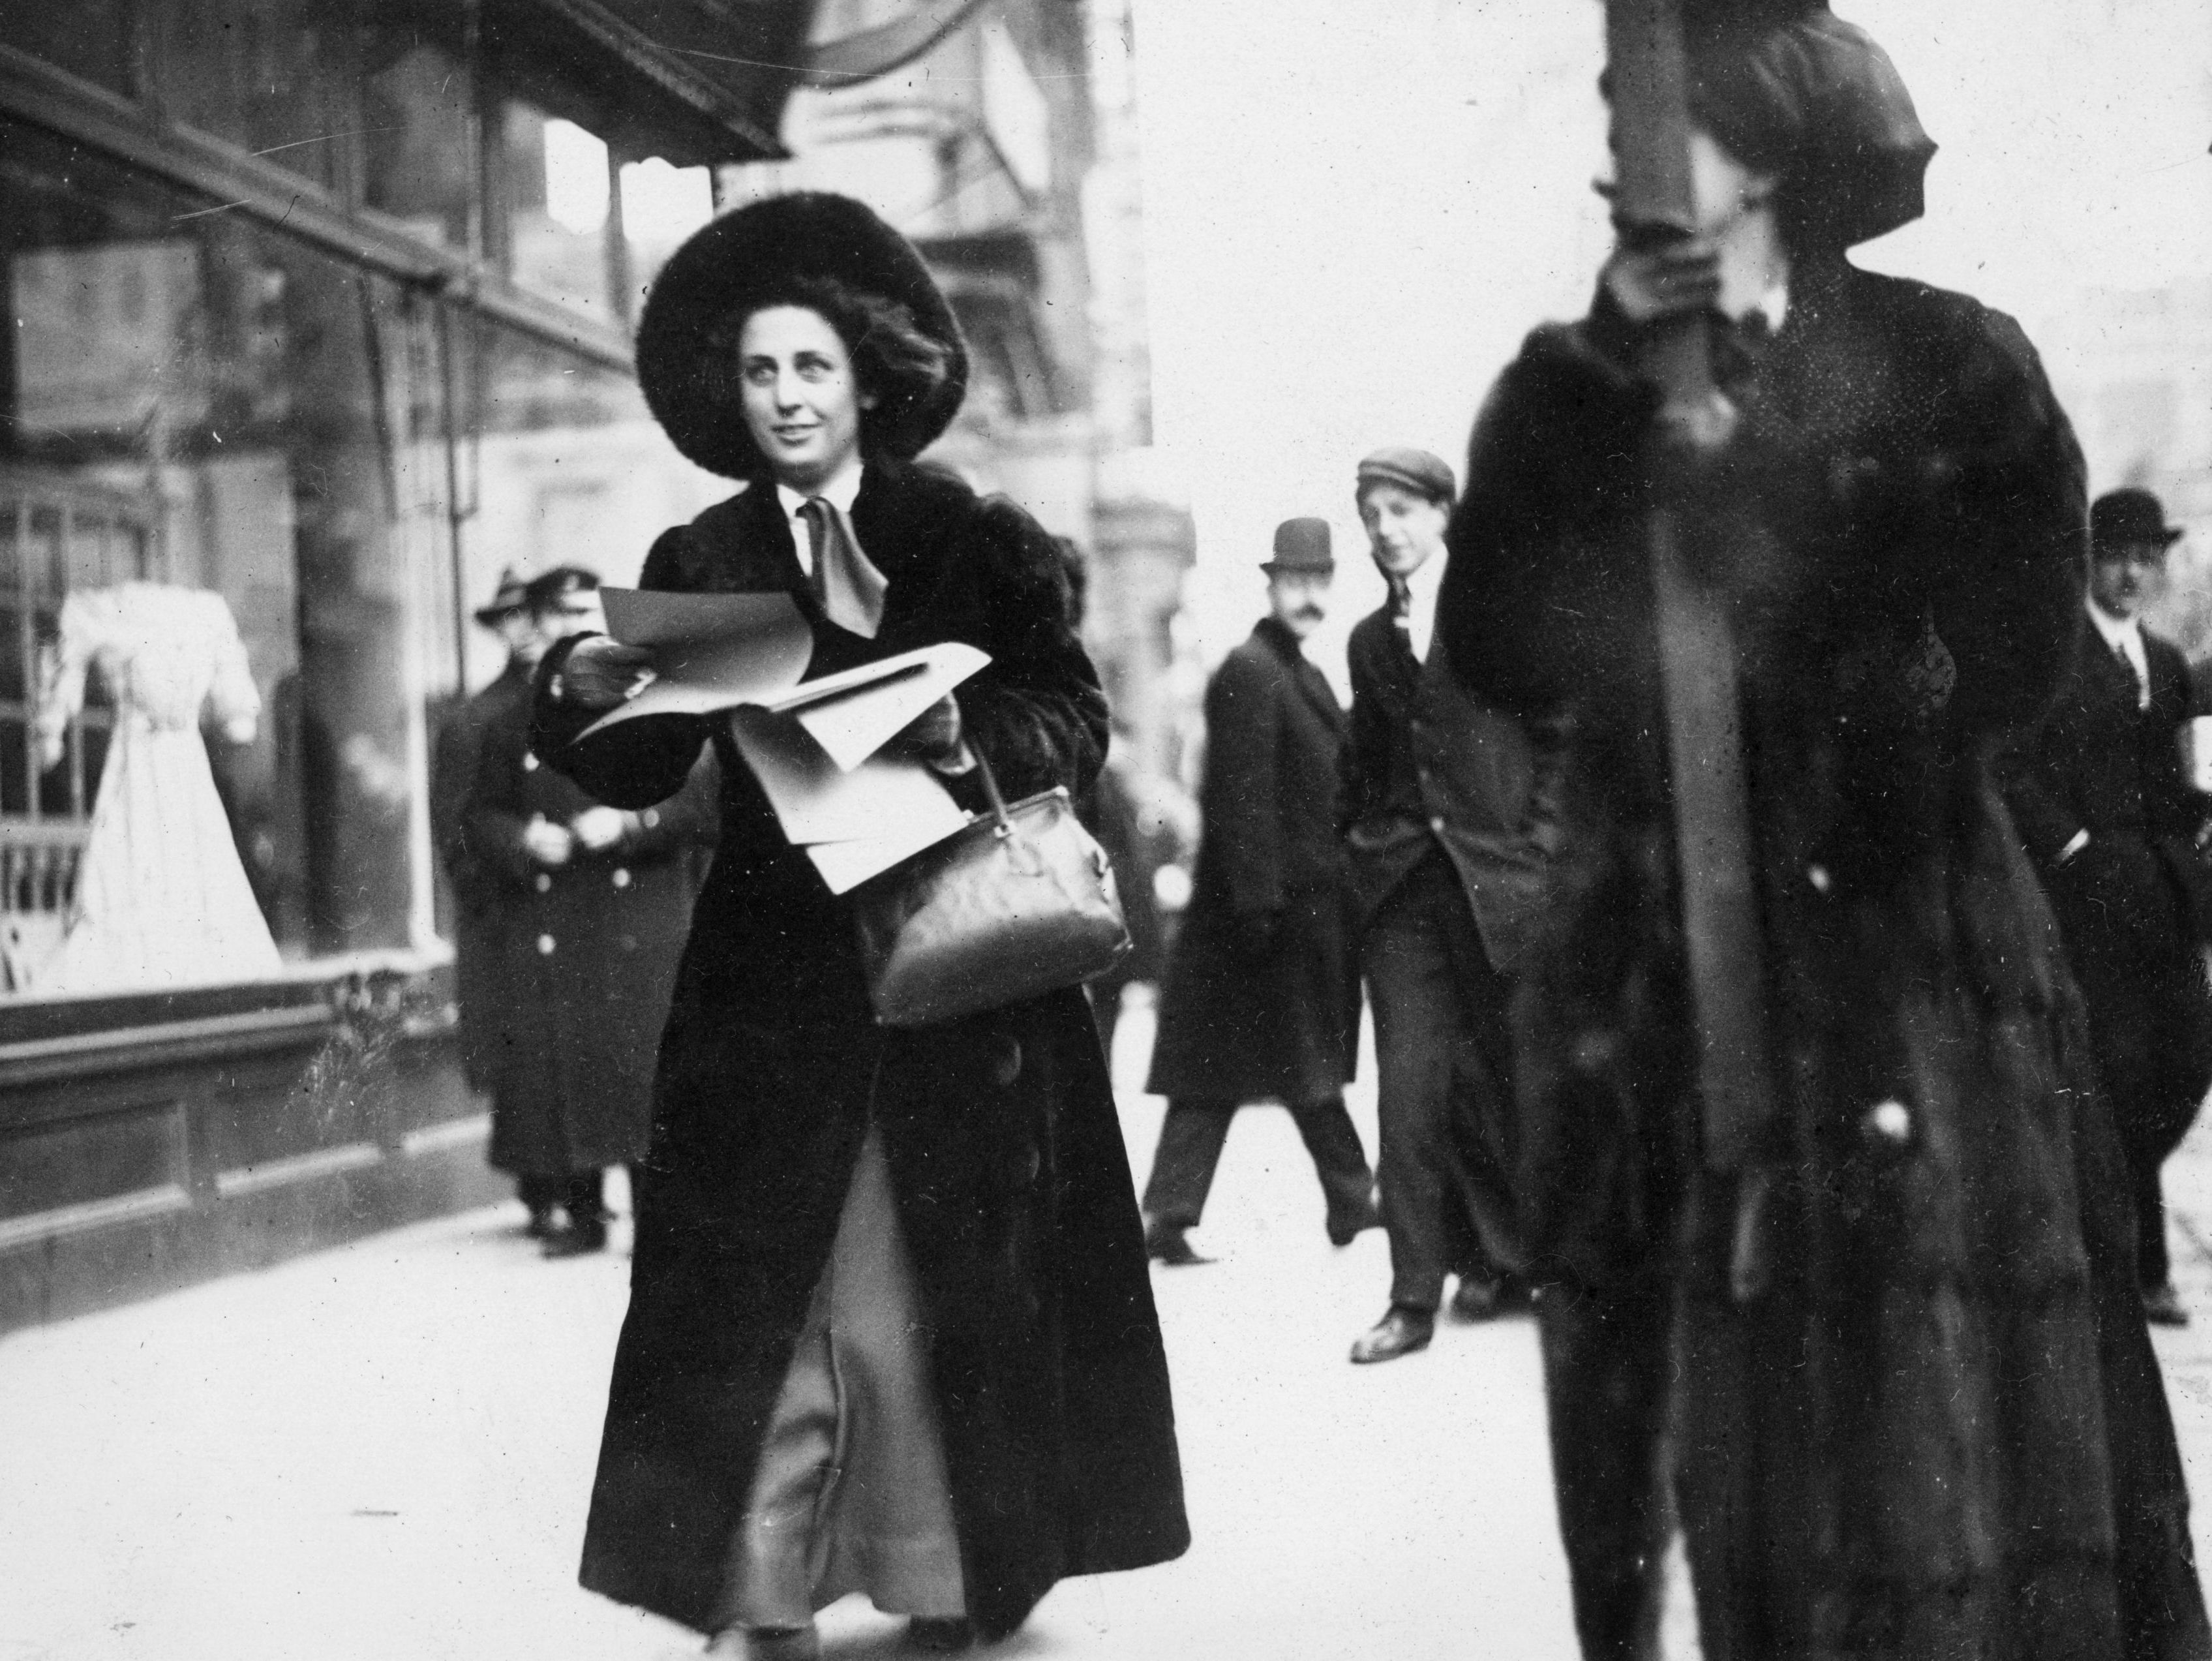 Martha Gruening, a suffragist leader, distributes literature on the movement to passersby in New York City, circa 1912. She later earned a law degree from New York University and was active in the civil rights movement.